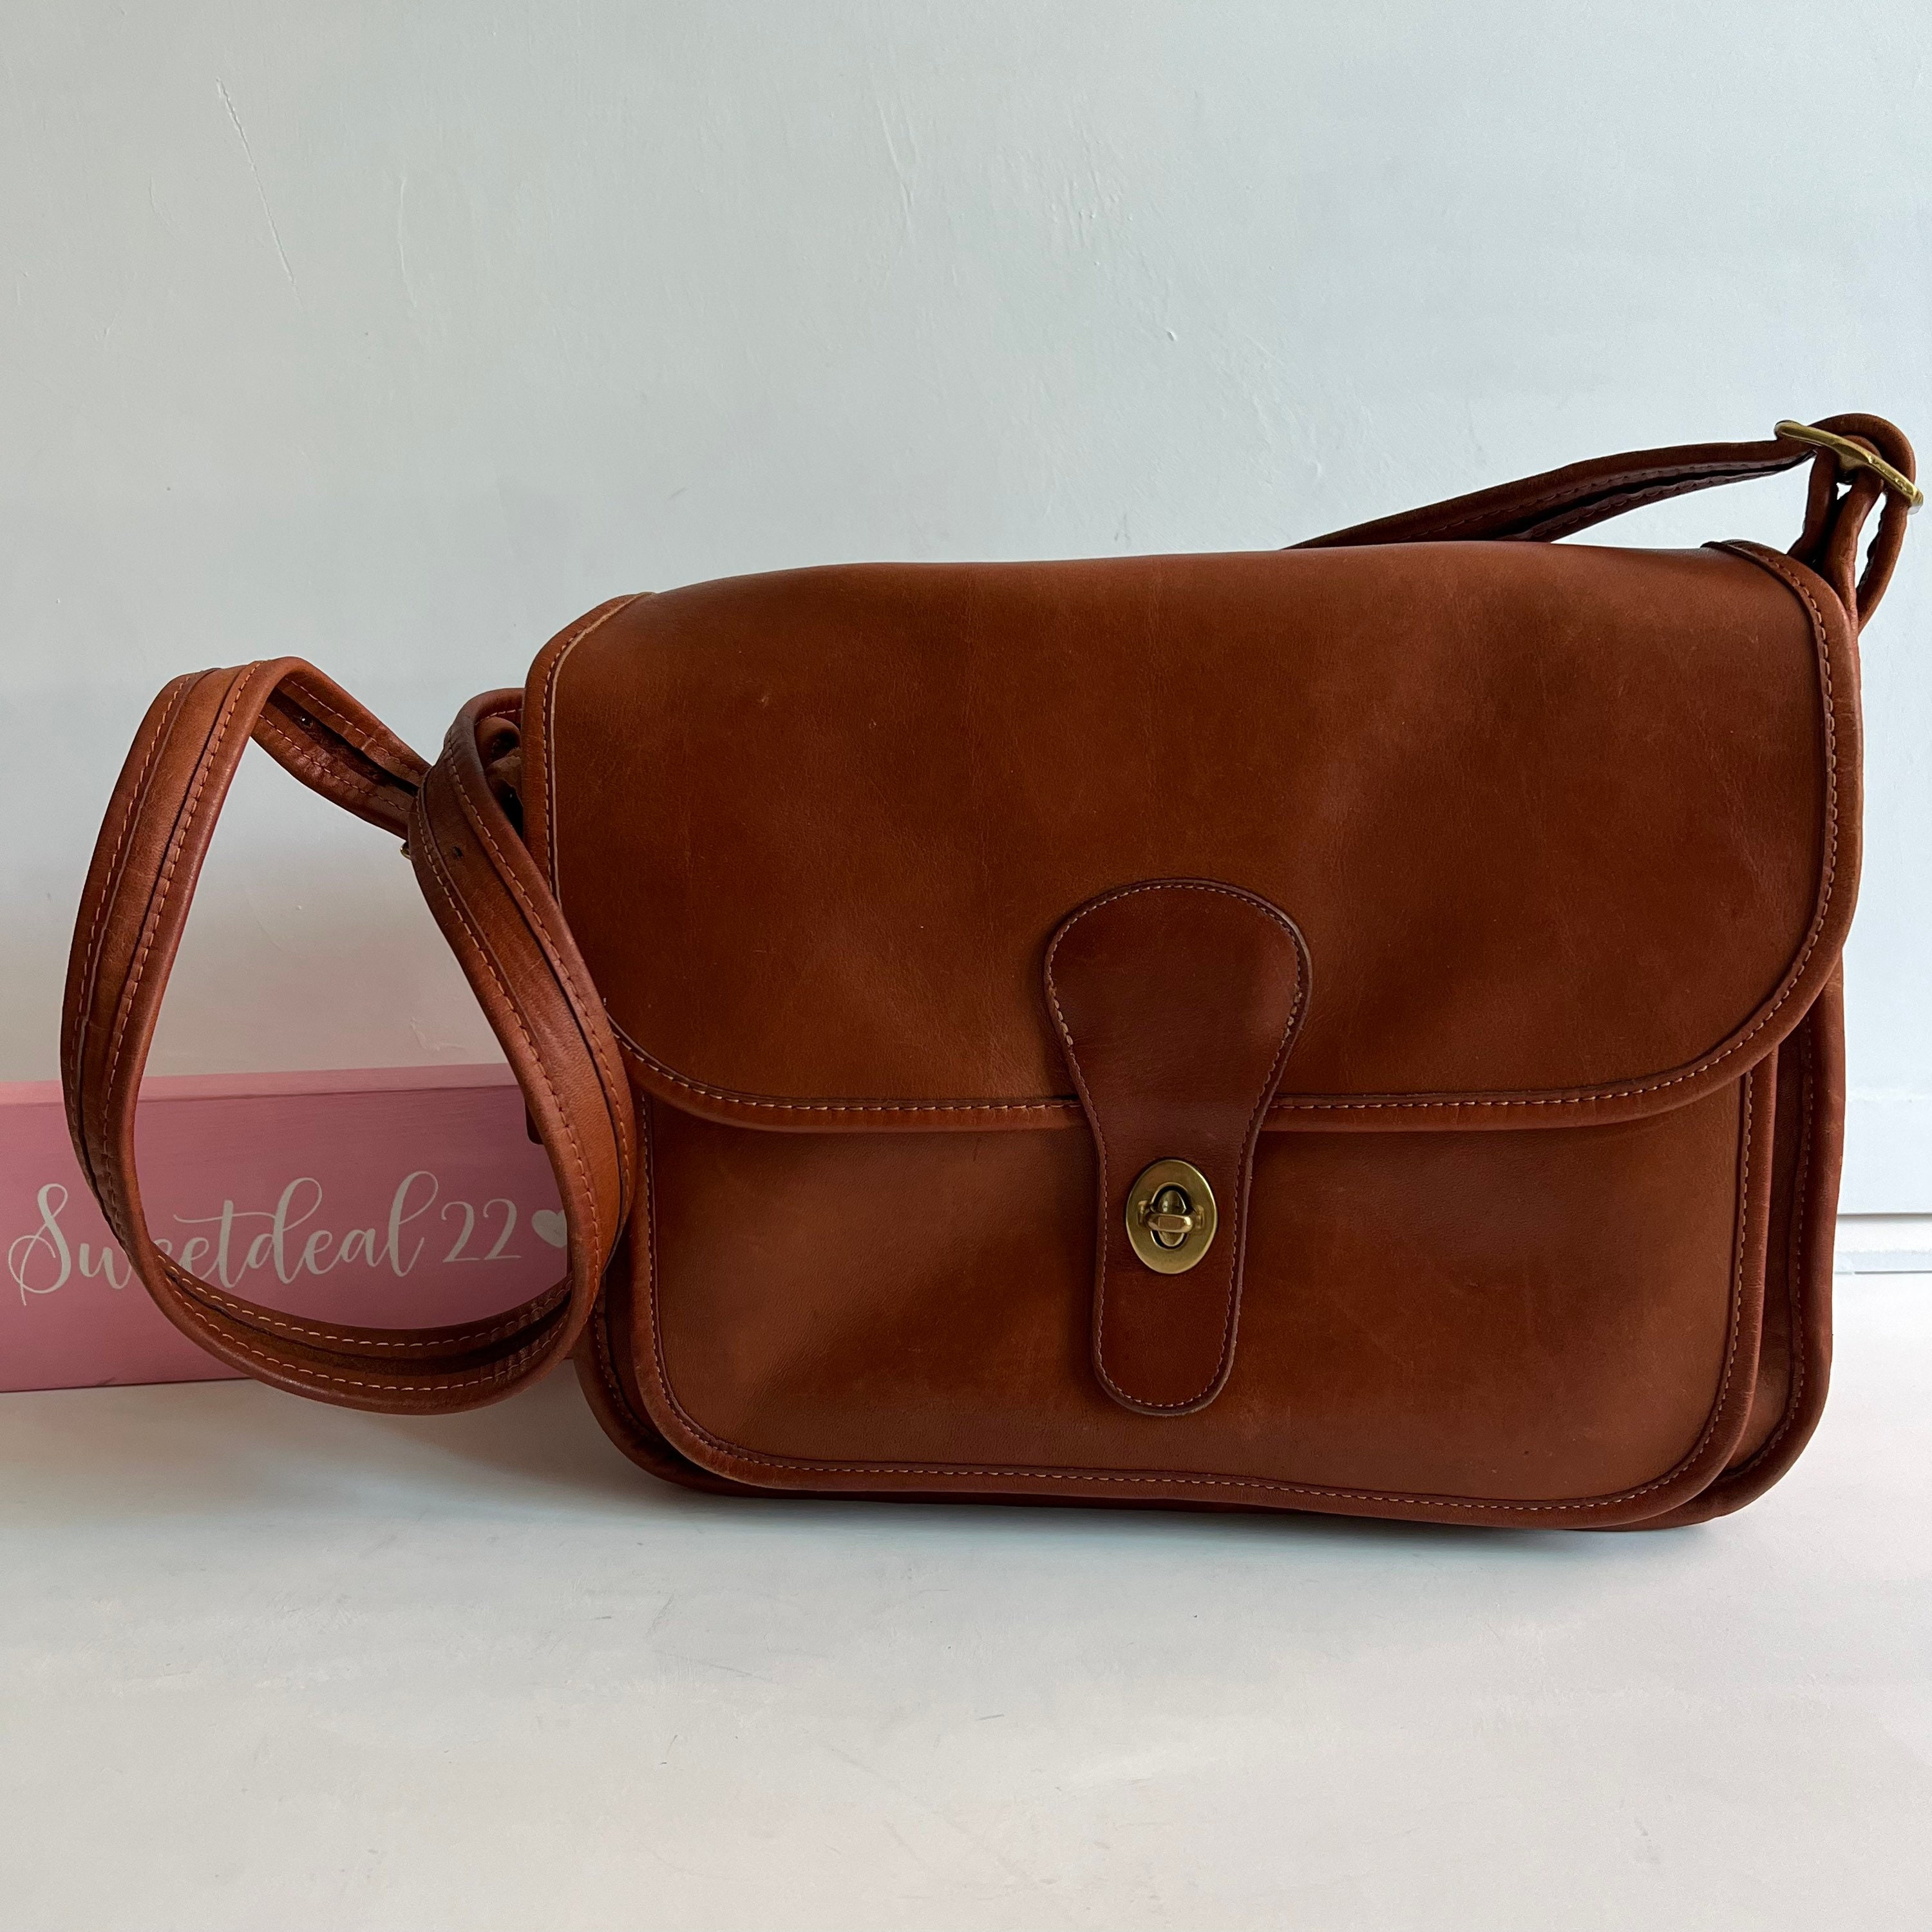 Coach Computer Bag Brown Leather Handbag Purse 9314 Made in 